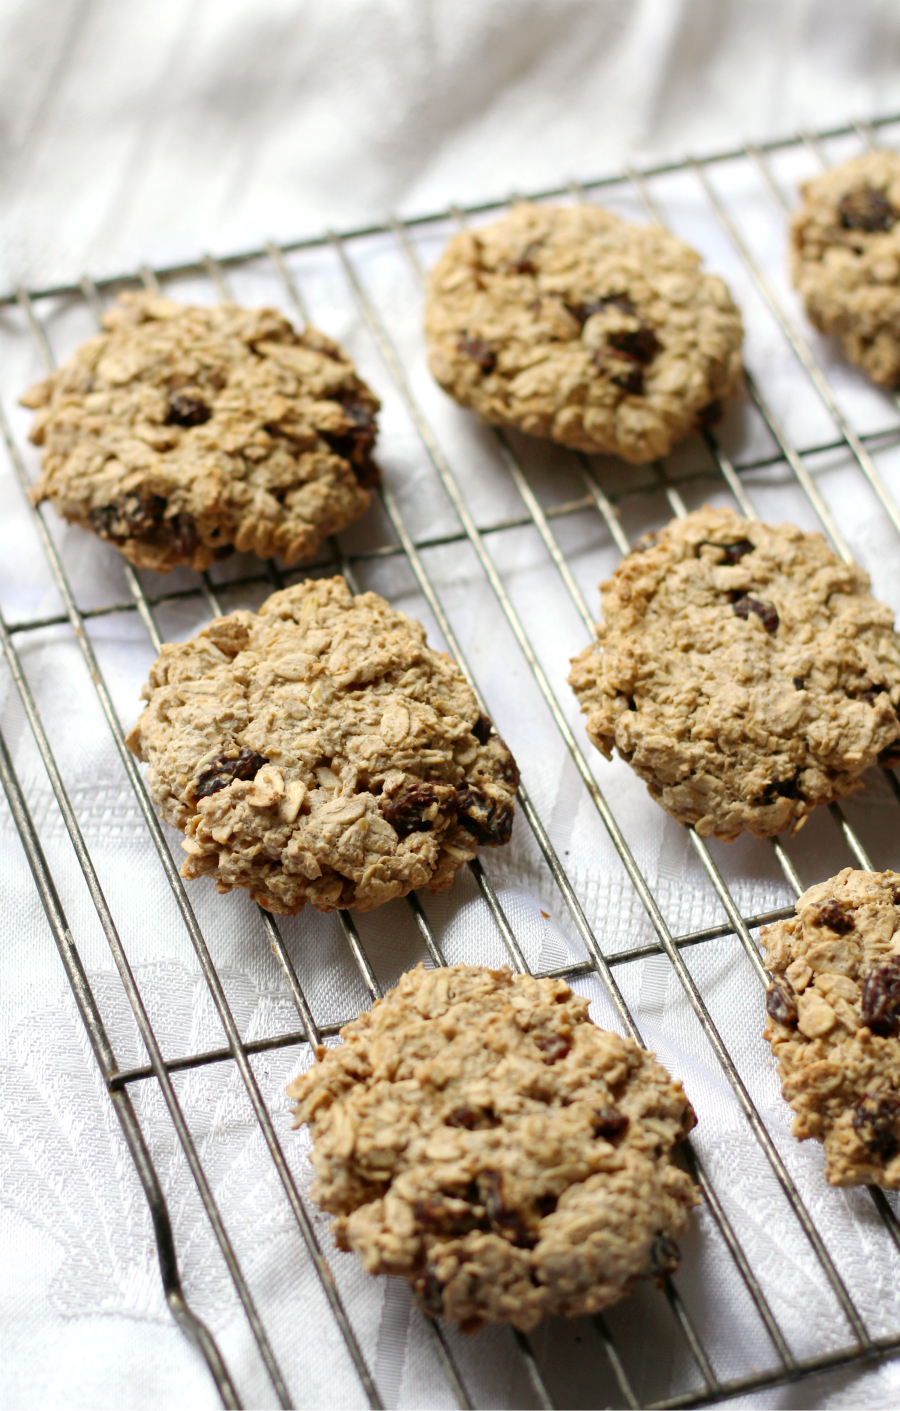 Chewy Gluten-Free Oatmeal Raisin Cookies (Allergy-Free, Vegan) | Strength and Sunshine @RebeccaGF666 Your favorite "healthy" cookies, now gluten-free, allergy-free, and vegan! These Chewy Gluten-Free Oatmeal Raisin Cookies are an easy dessert recipe to bake up any day of the week when the craving for a sweet snack hits!